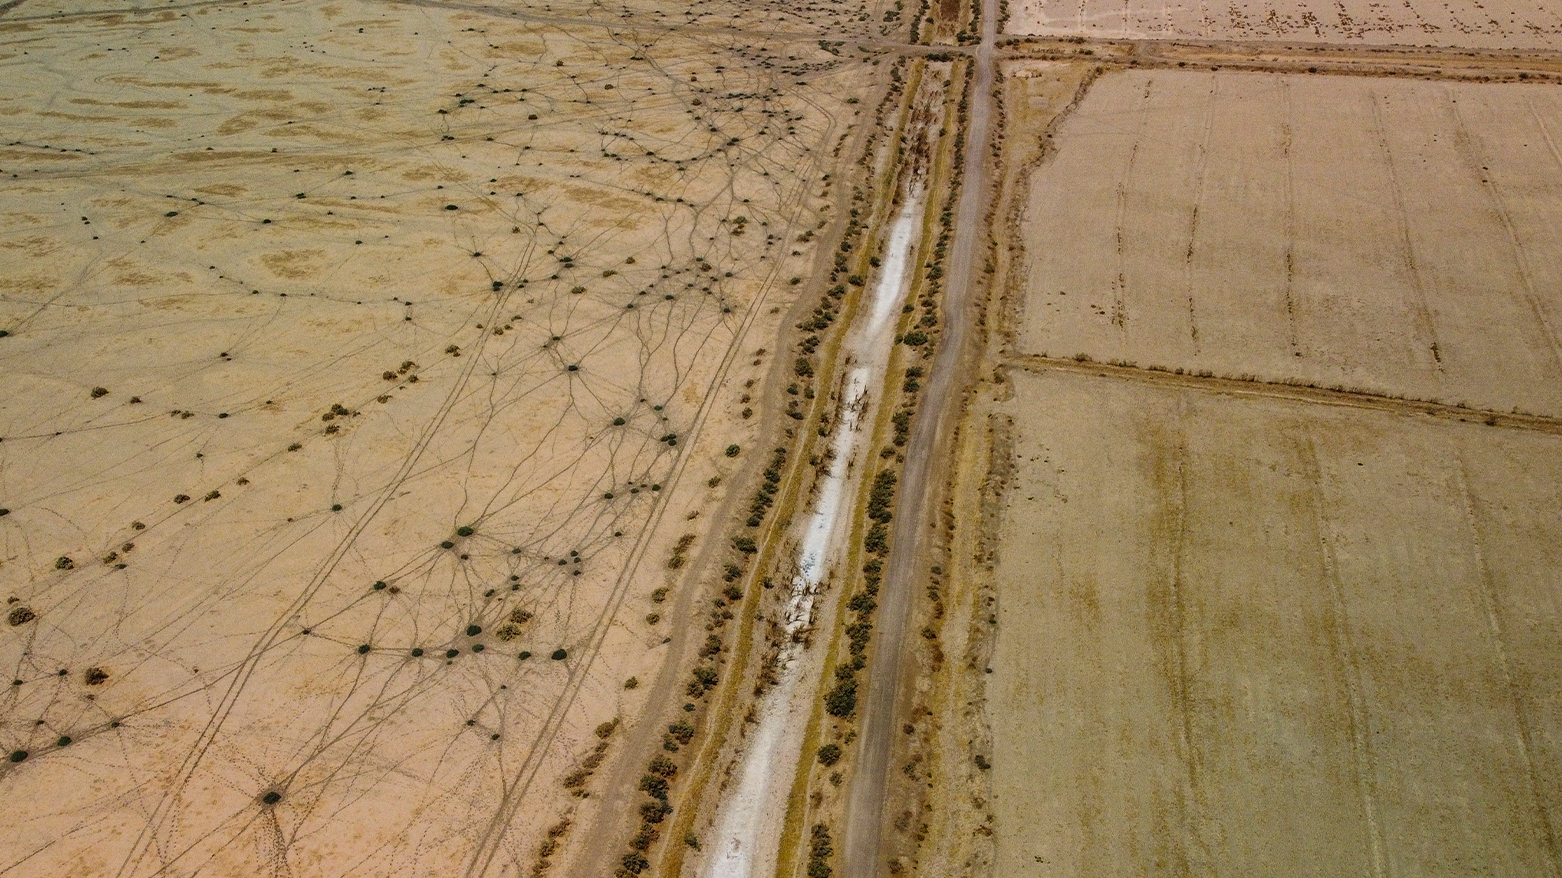 The irrigation channel in the district of Dawwayeh is dry due to low water levels as a result of back to back drought and severe cuts by the Iraqi government. (Photo: AP)